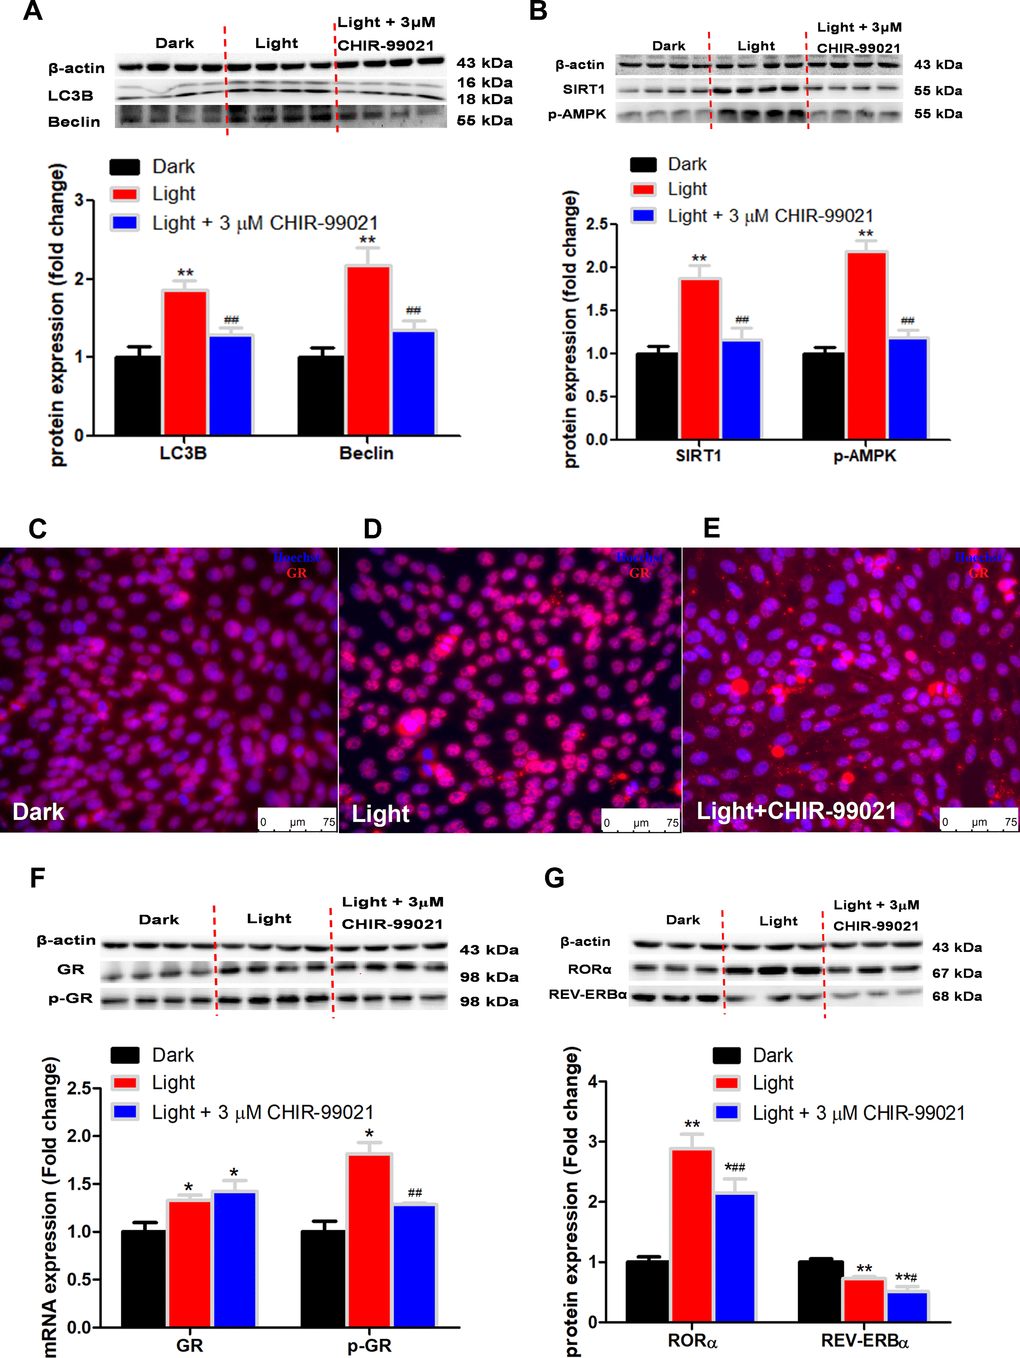 GSK3 inhibitor, CHIR-99021, rescues the expression of autophagy-related proteins and nuclear receptor GR, RORα expression in light exposure cells. (A–B) Protein content of LC3B, Beclin, SIRT1 and phospho-AMPK. GSK3 inhibitor CHIR-99021 completely rectified light-induced up-regulation of autophagy-related proteins, including LC3B, Beclin, SIRT1 and phospho-AMPK, in HT-22 cells. Values are means ± SEM, **p ##p C–E) Immunofluorescence of GR, showing that CHIR-99021 was able to restore light-induced GR activation and GR nuclear translocation. The nuclei were stained with Hoechst (blue) and GR was stained with GR antibody (red). Scale bars, 75 μm; (F–G) Protein content of GR, phospho-GR, RORα and REV-ERBα. CHIR-99021 significantly alleviated light-induced increase of phospho-GR and RORα protein expression, yet the increase of total GR and the decrease of REV-ERBα in Light group were not restored. Values are means ± SEM, *p p #p ##p 